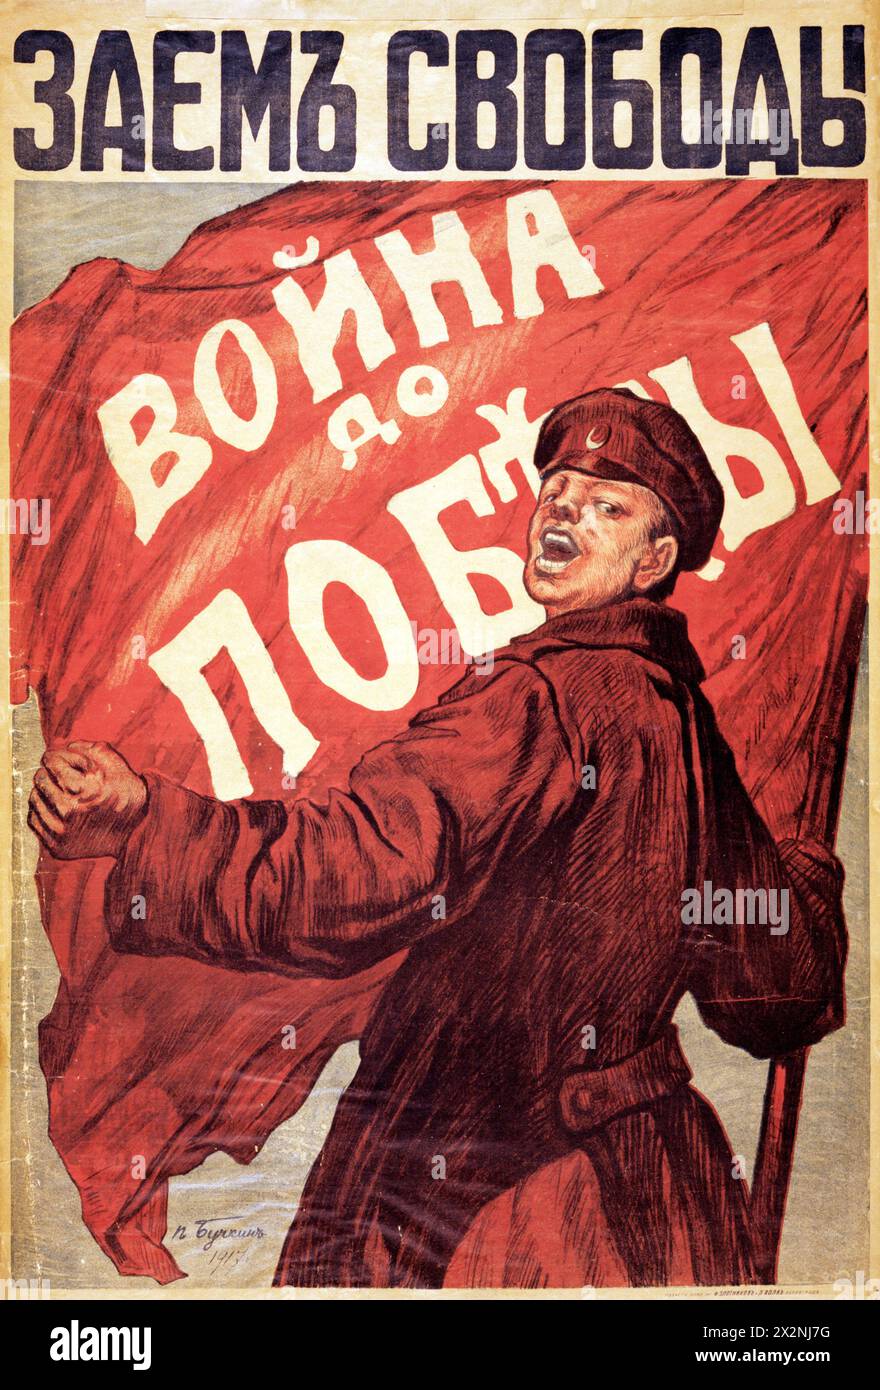 Zaëm svobody. Voǐna do pobedy - Loan for liberty. War until victory. Soldier unfurling red 'War until victory' banner... Old Russian poster. Stock Photo